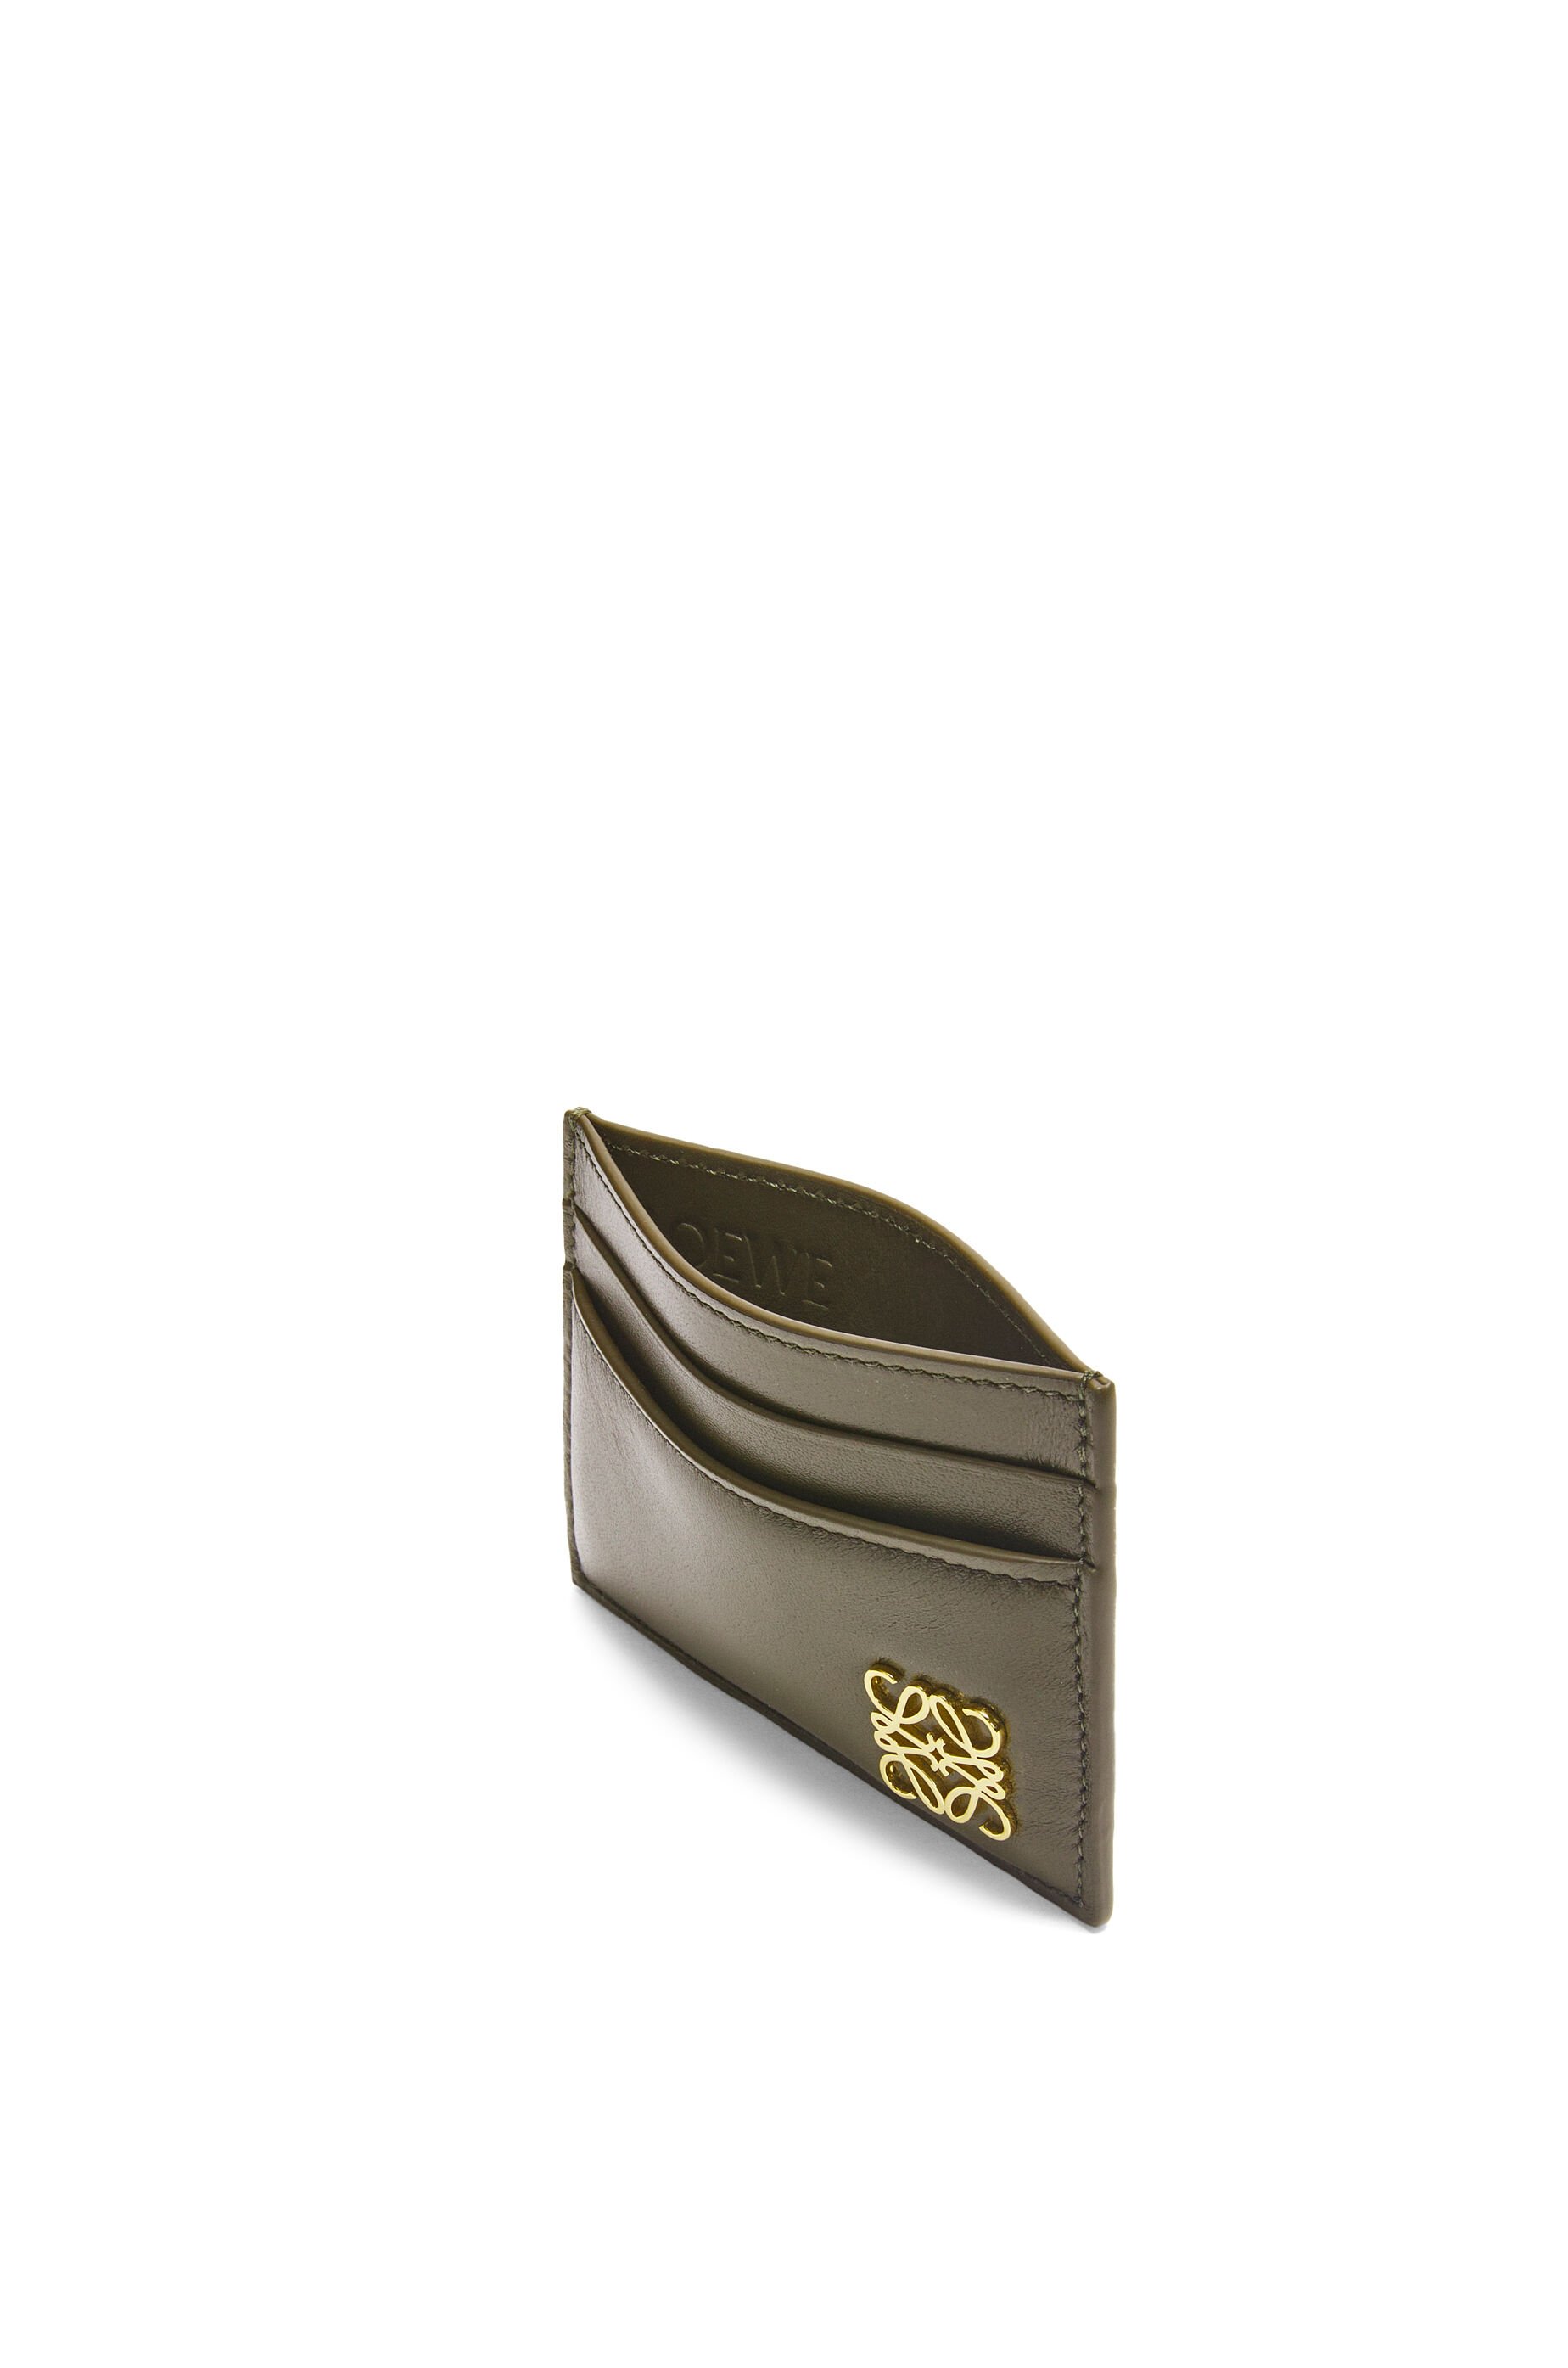 Luxury wallets & small leather goods for women - LOEWE